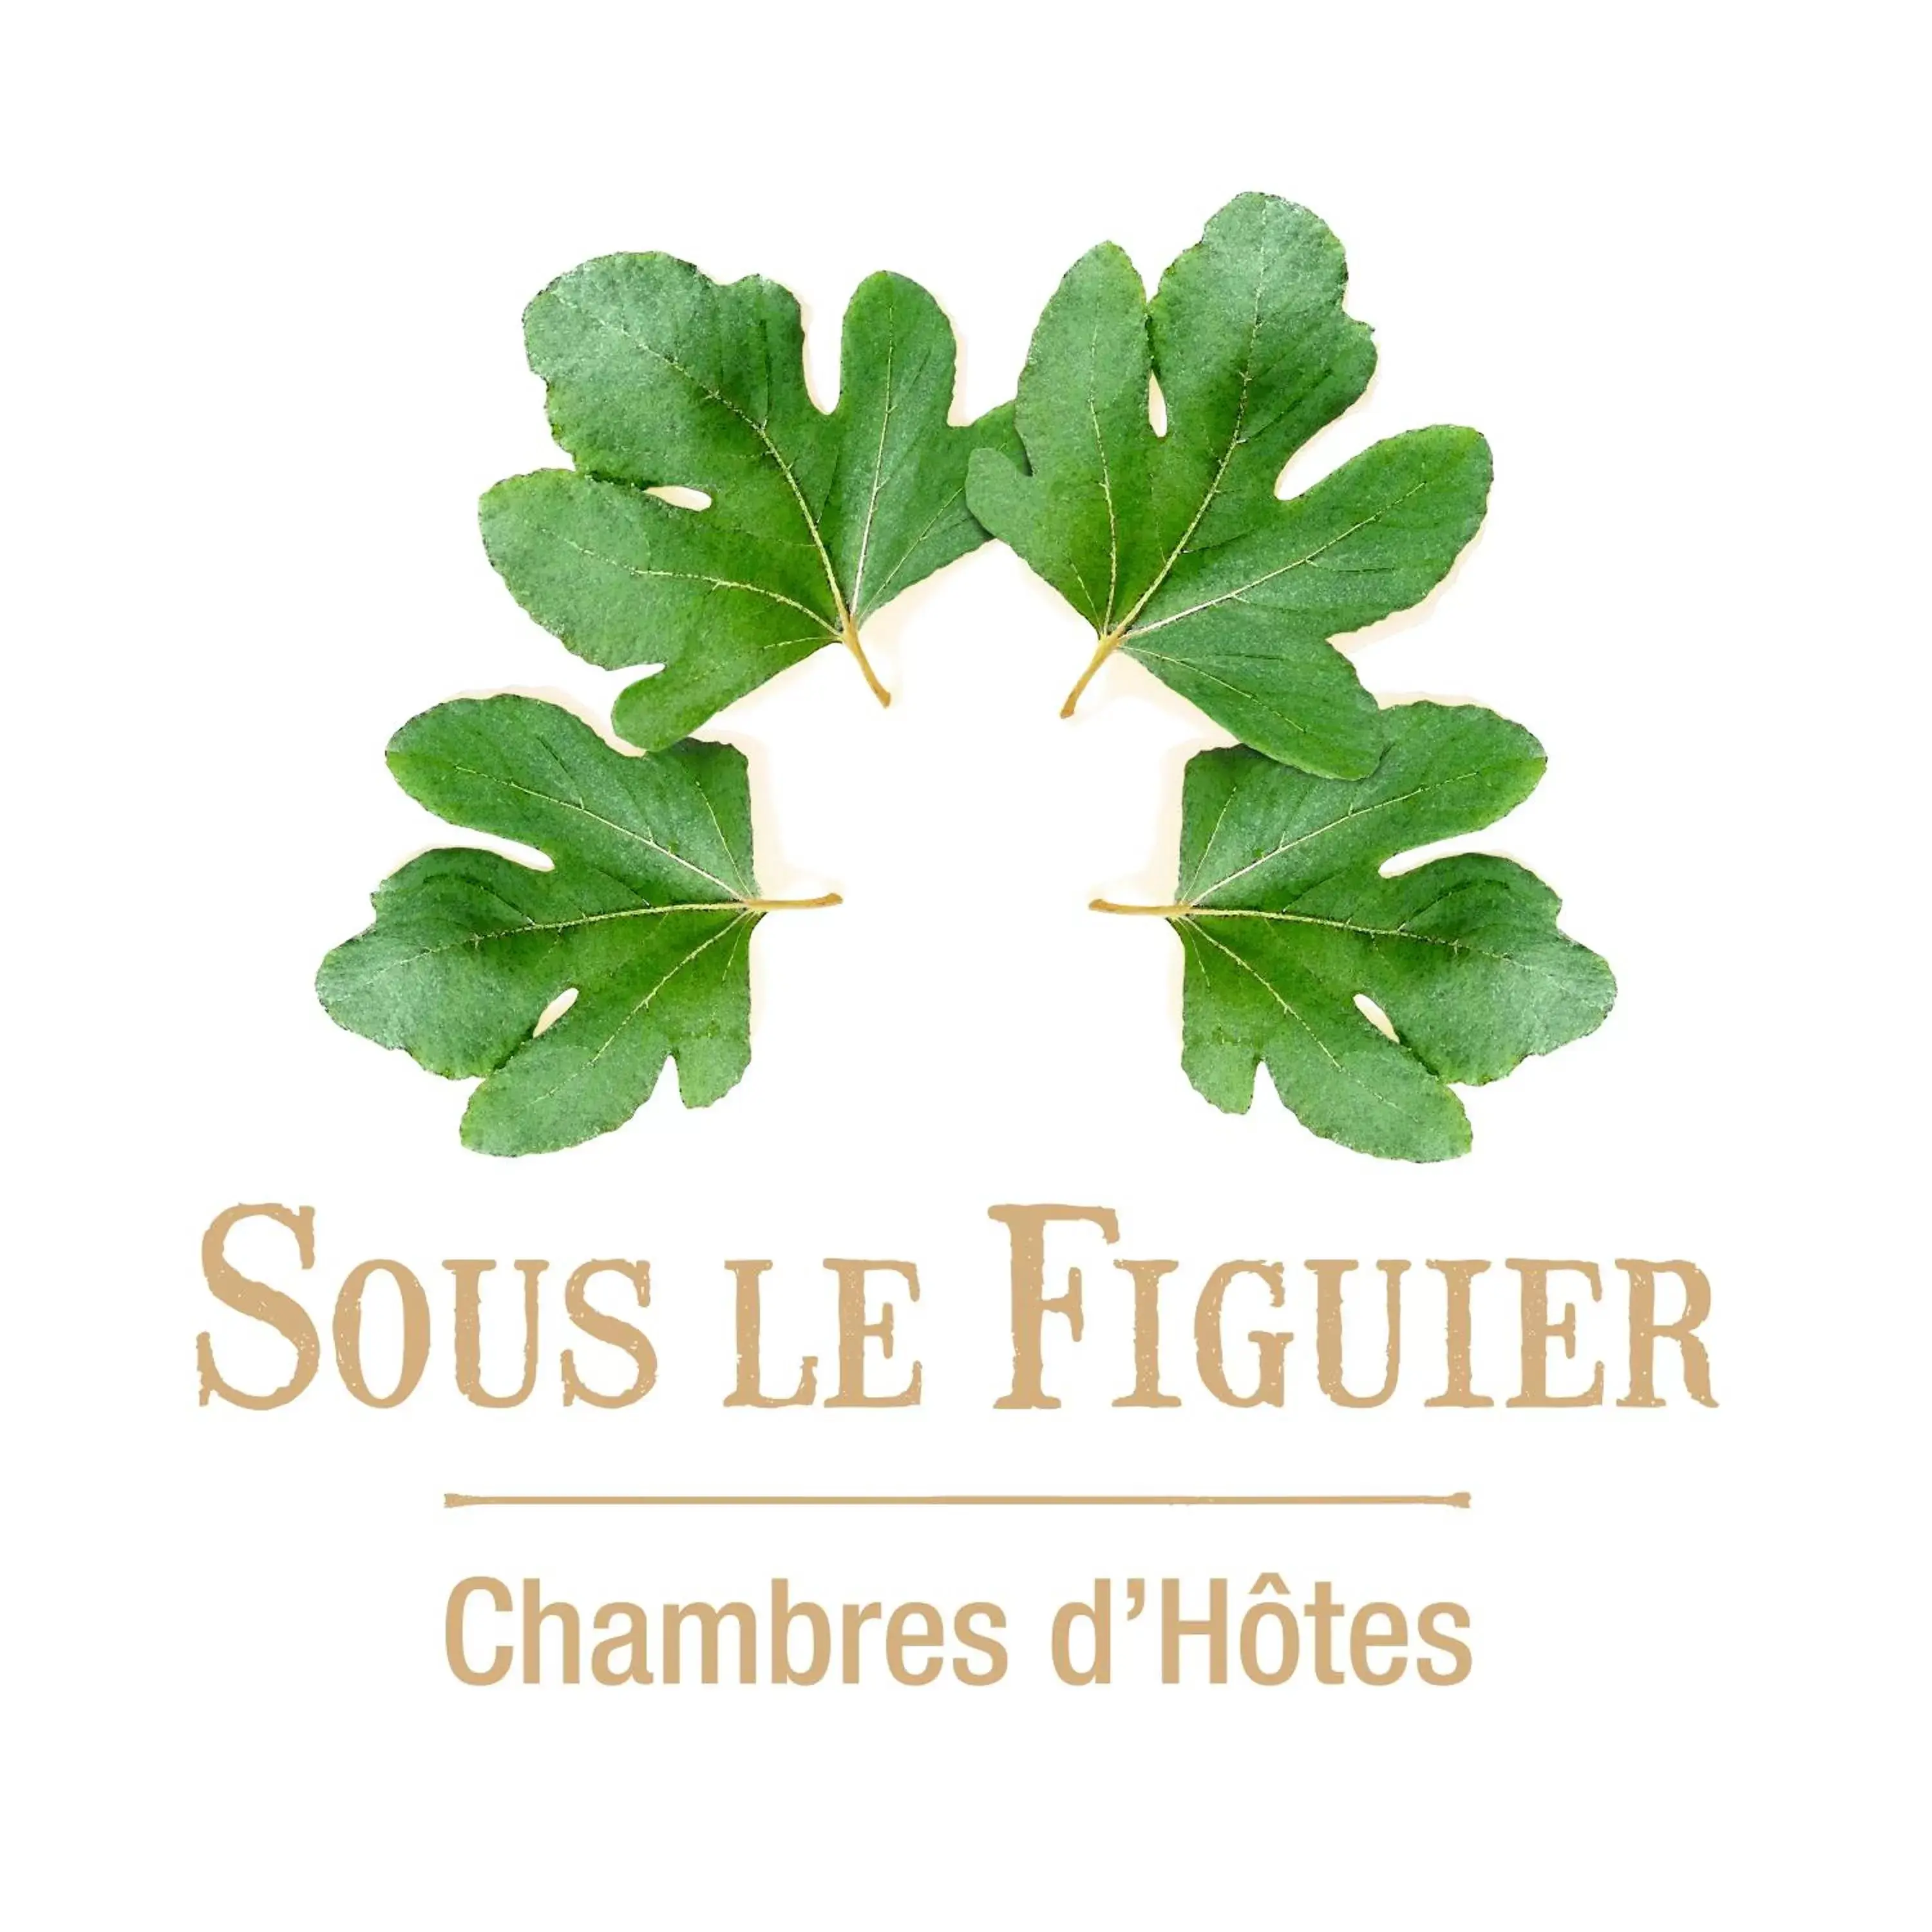 Property logo or sign in Sous Le Figuier